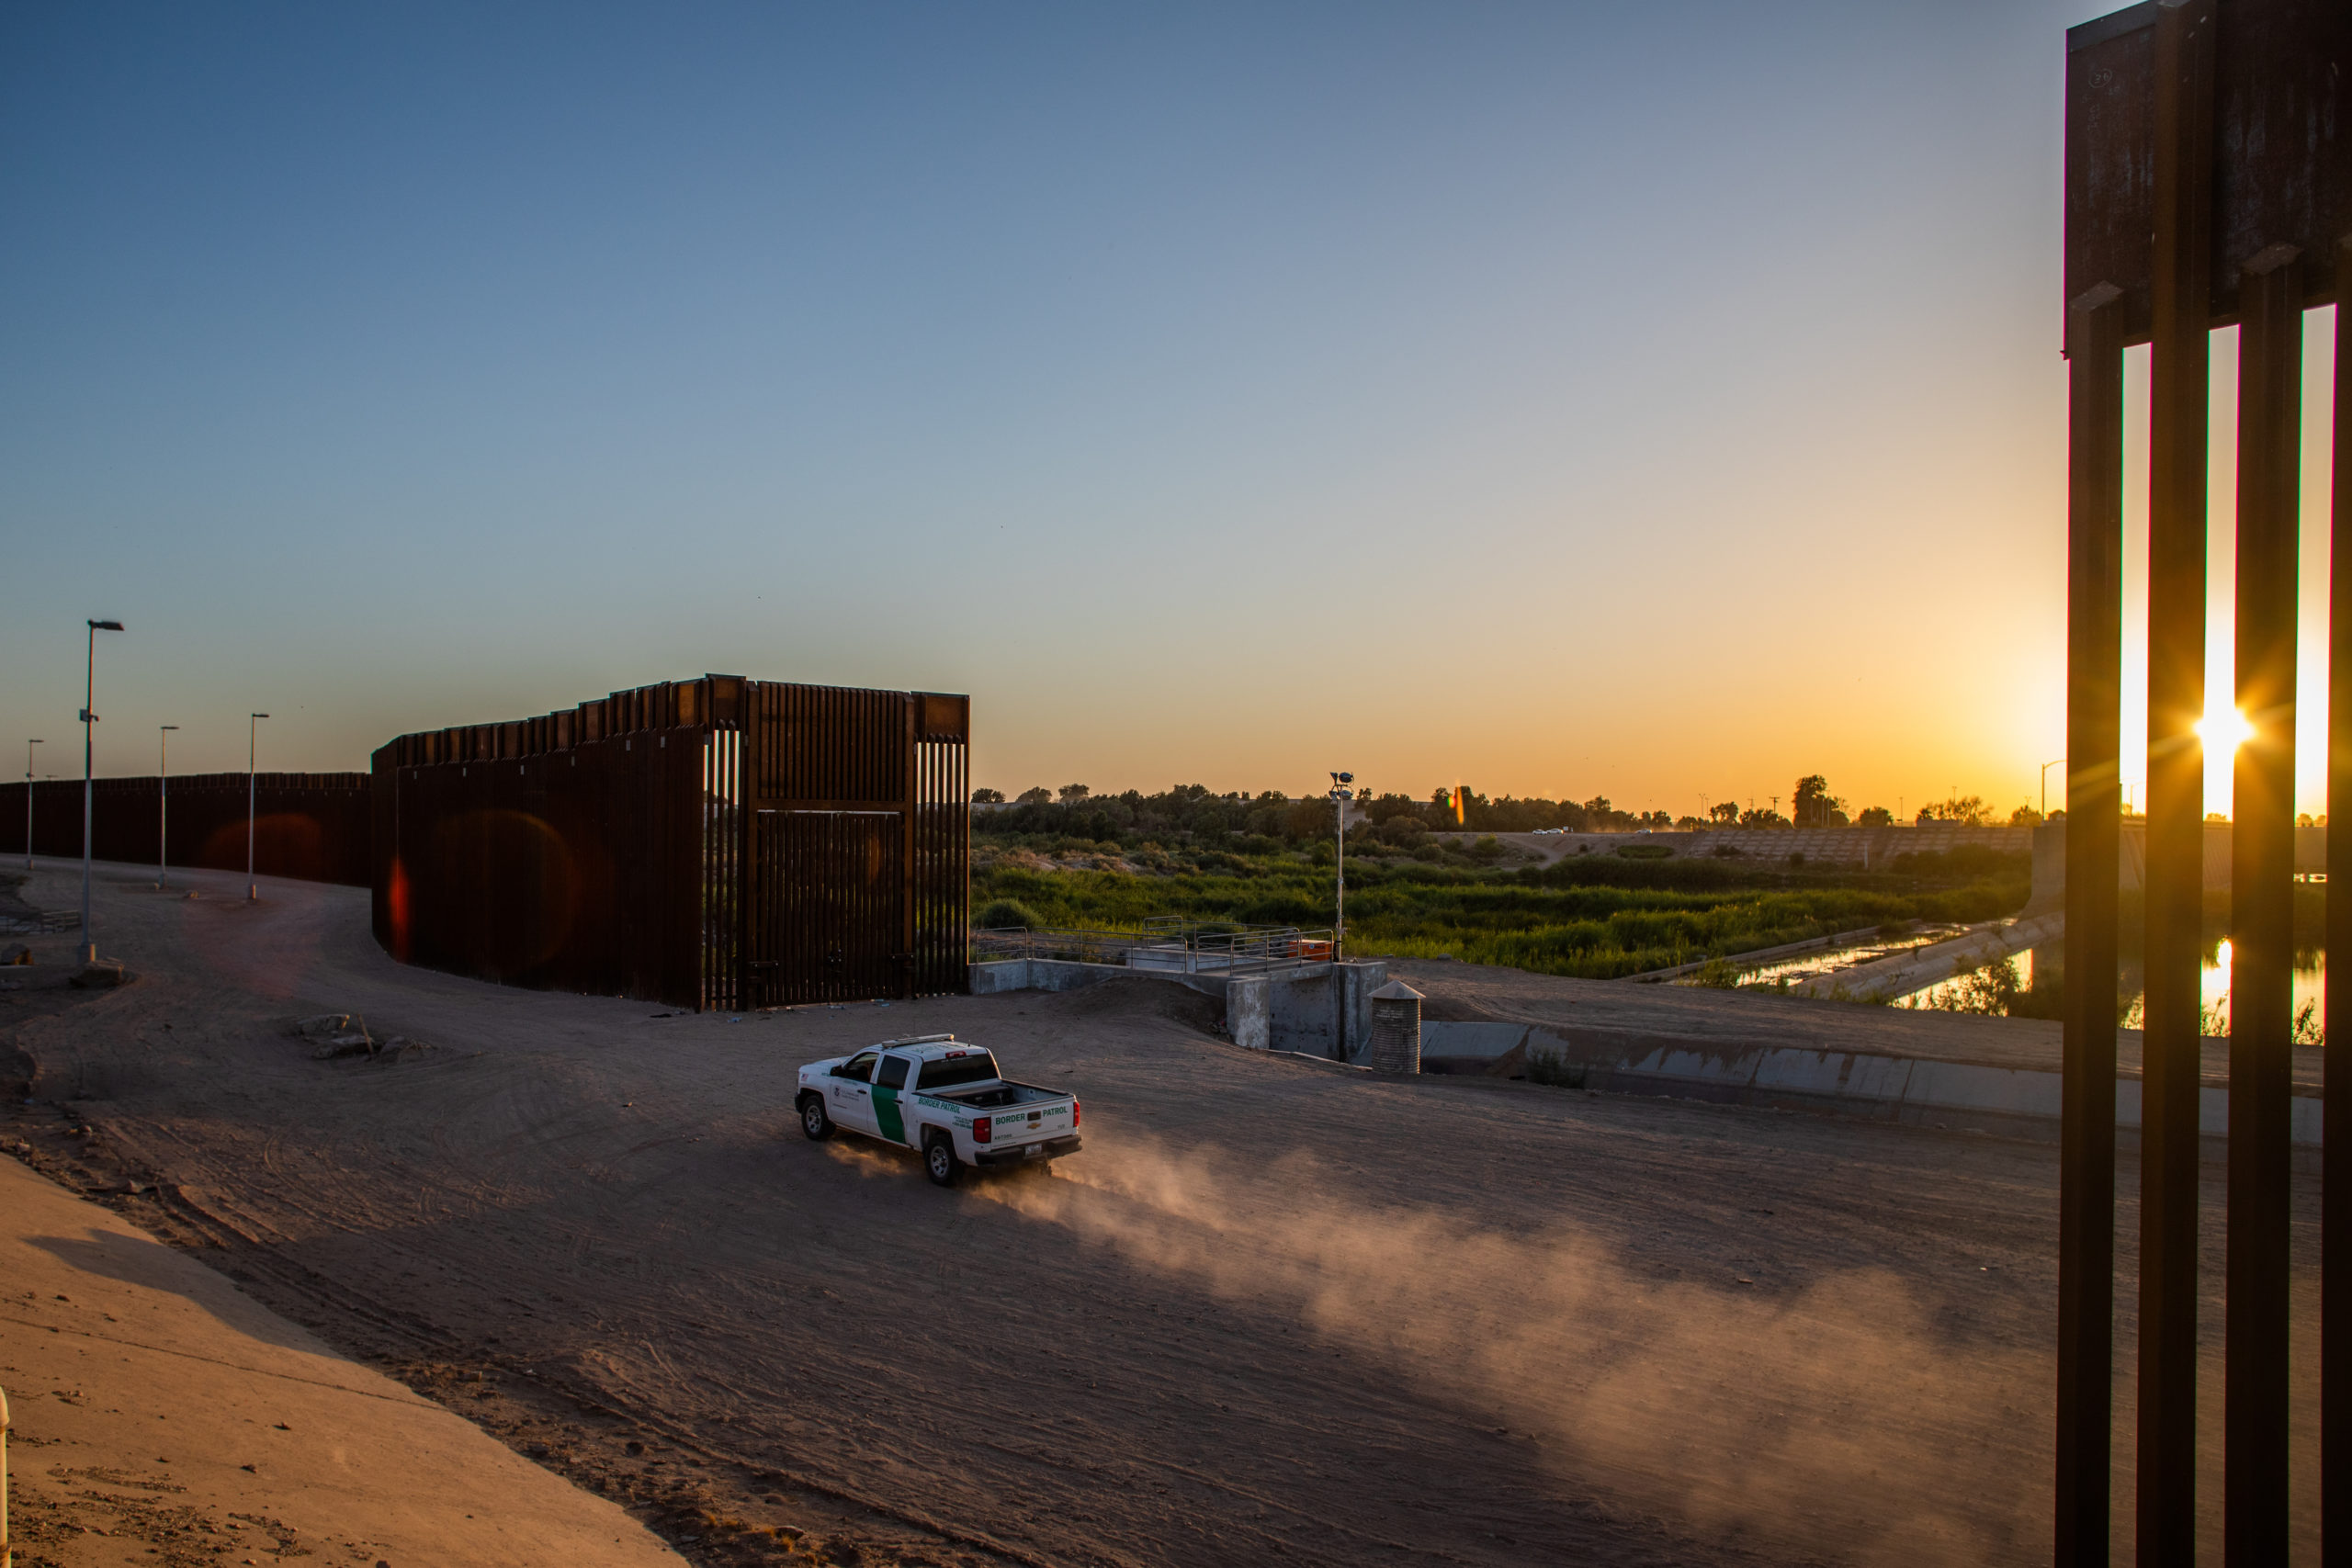 YUMA, AZ - MAY 12: A border patrol truck drives by the wall at the US-Mexico border on May 12, 2021 in Yuma, Arizona. The Biden administration is trying to develop a plan to safely handle the surge of immigrants coming across the Southern border. (Photo by Apu Gomes/Getty Images)